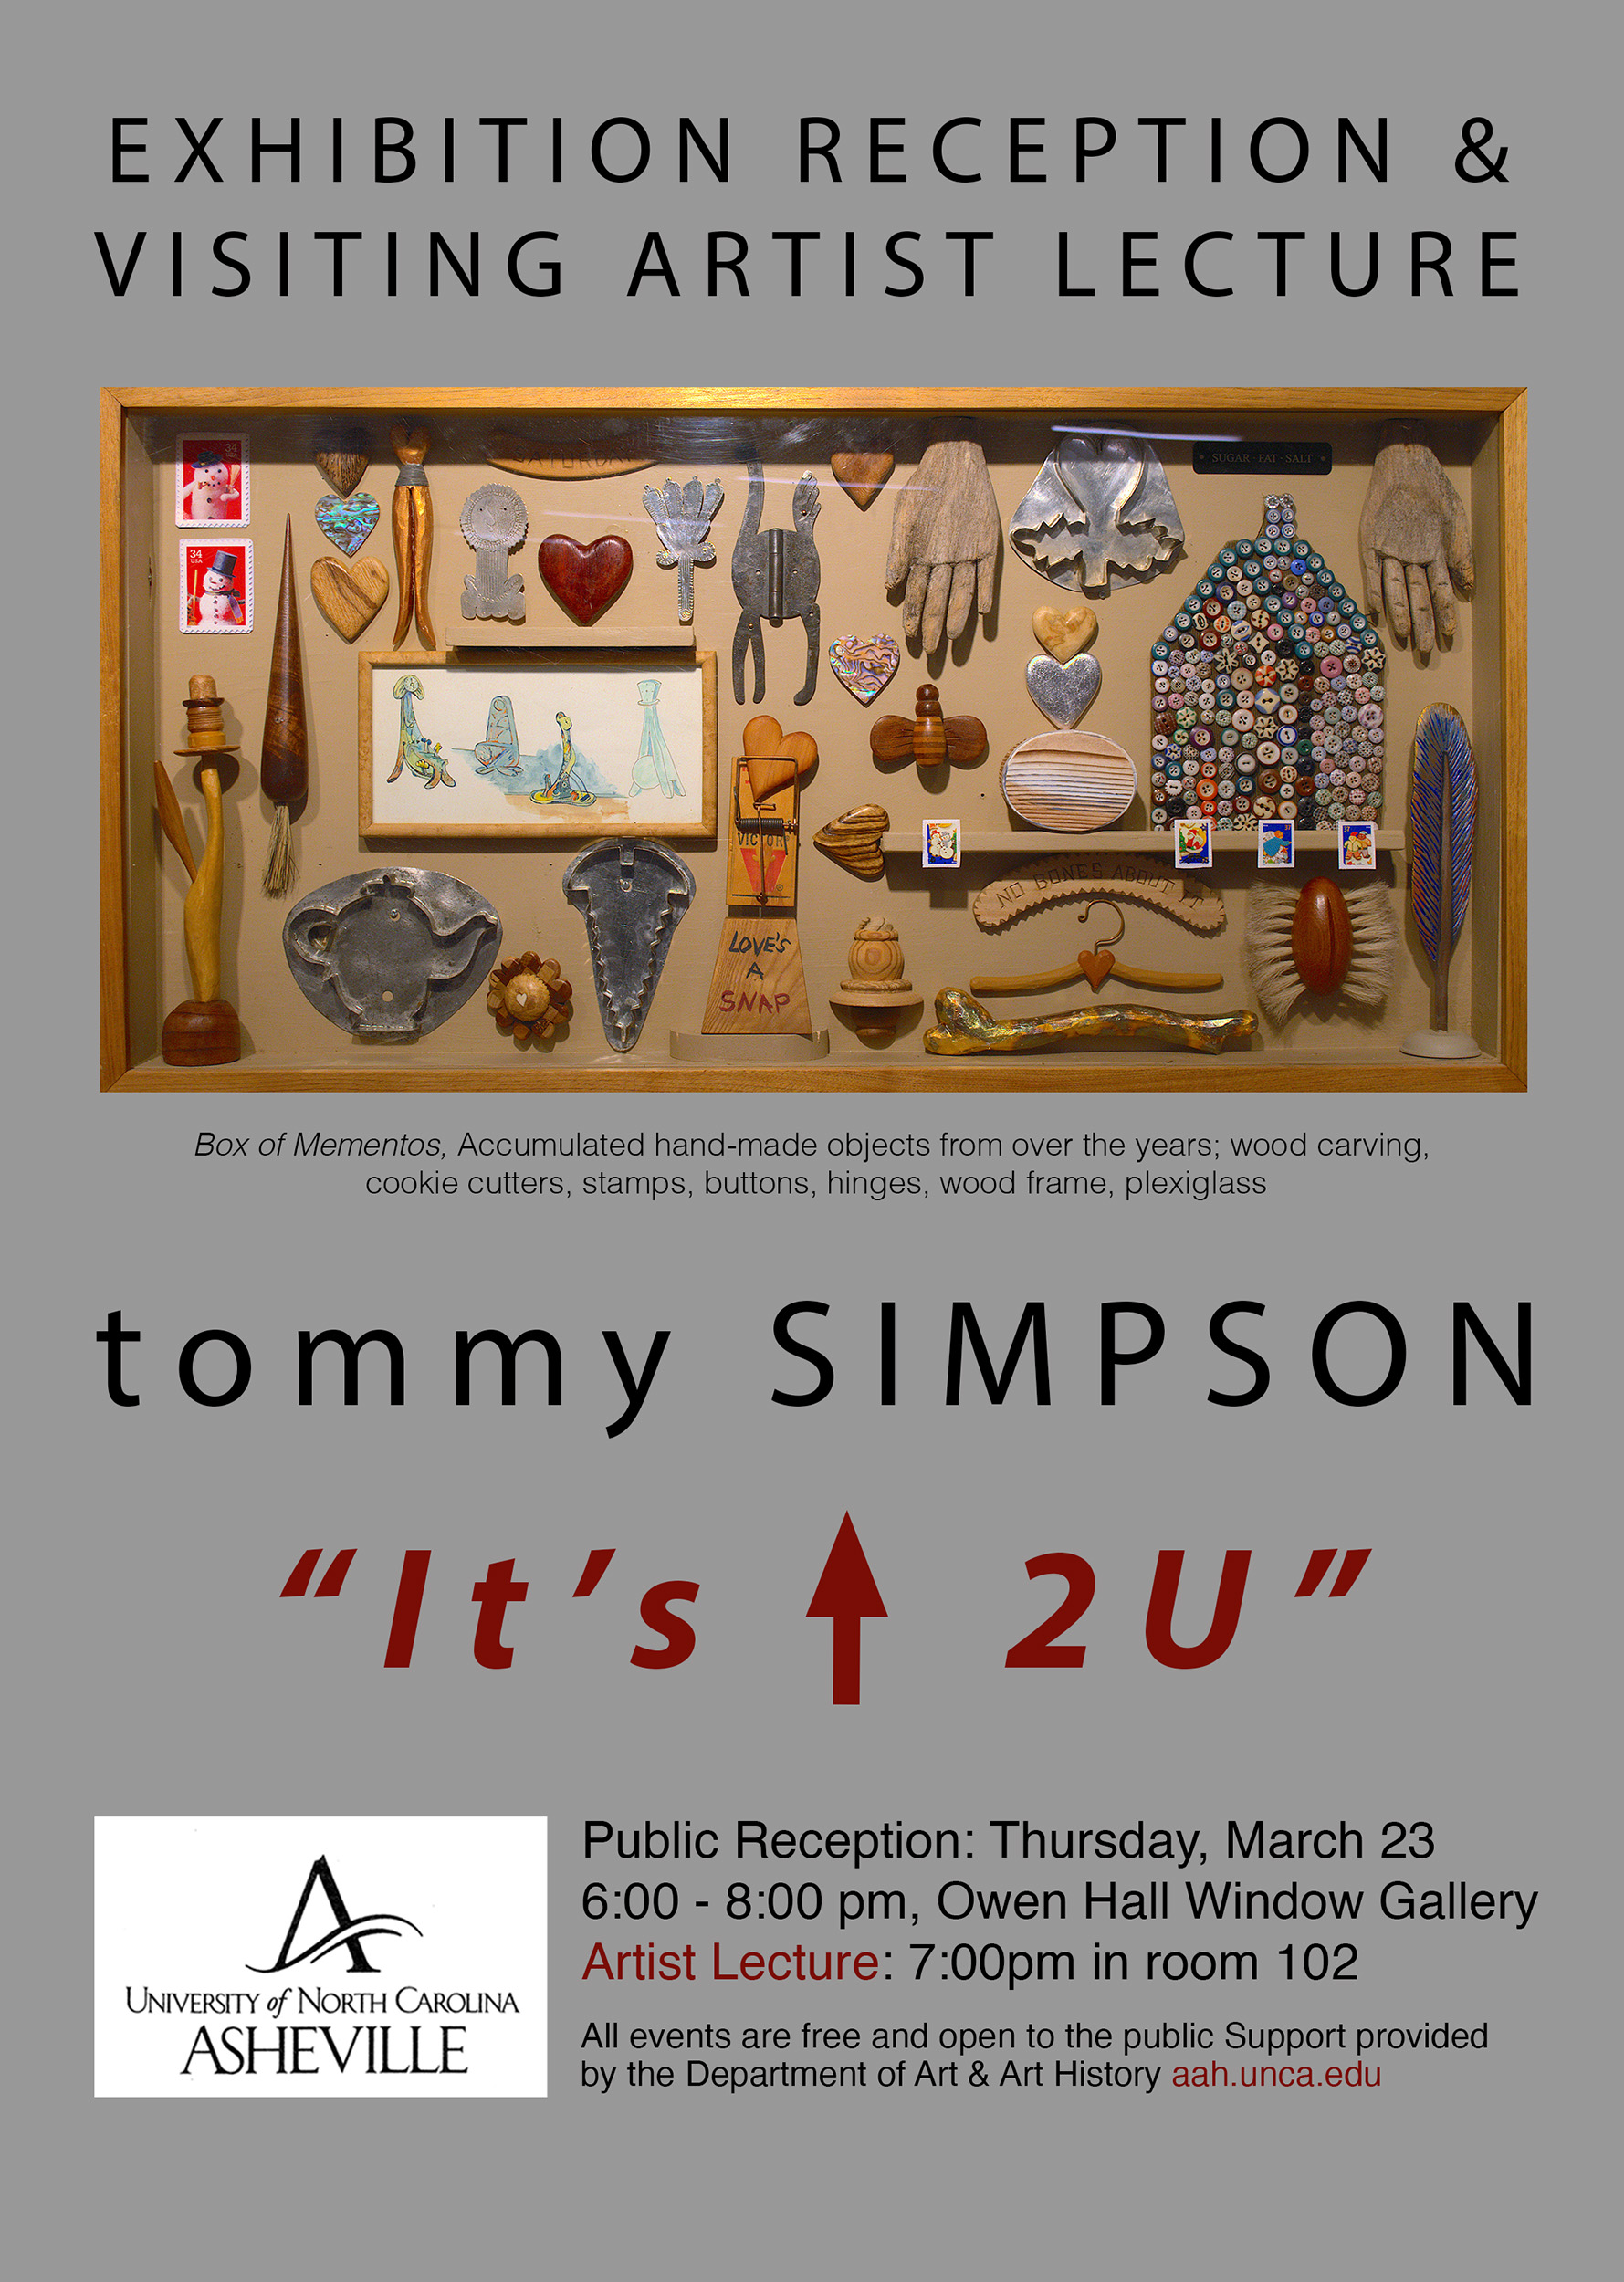 Tommy Simpson Exhibition Reception & Artist Lecture Poster